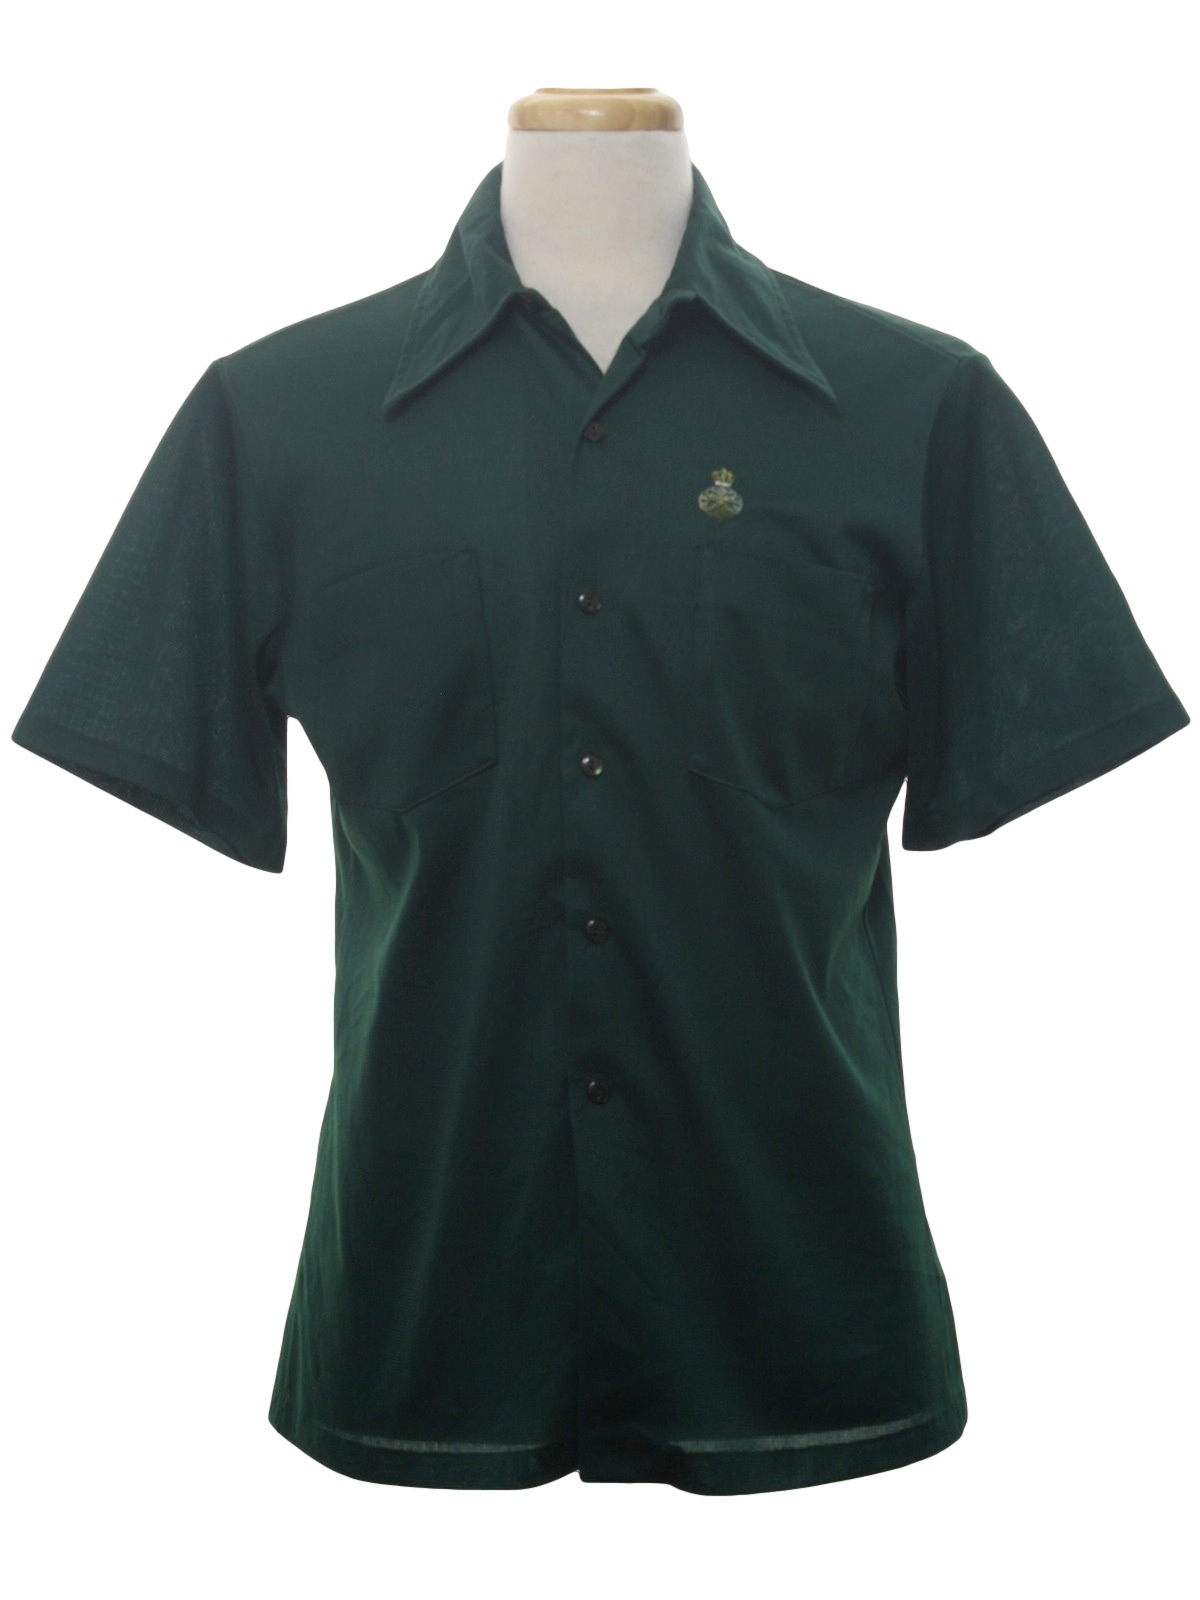 1970 s jcpenney mens sport shirt 70s jcpenney mens green background ...